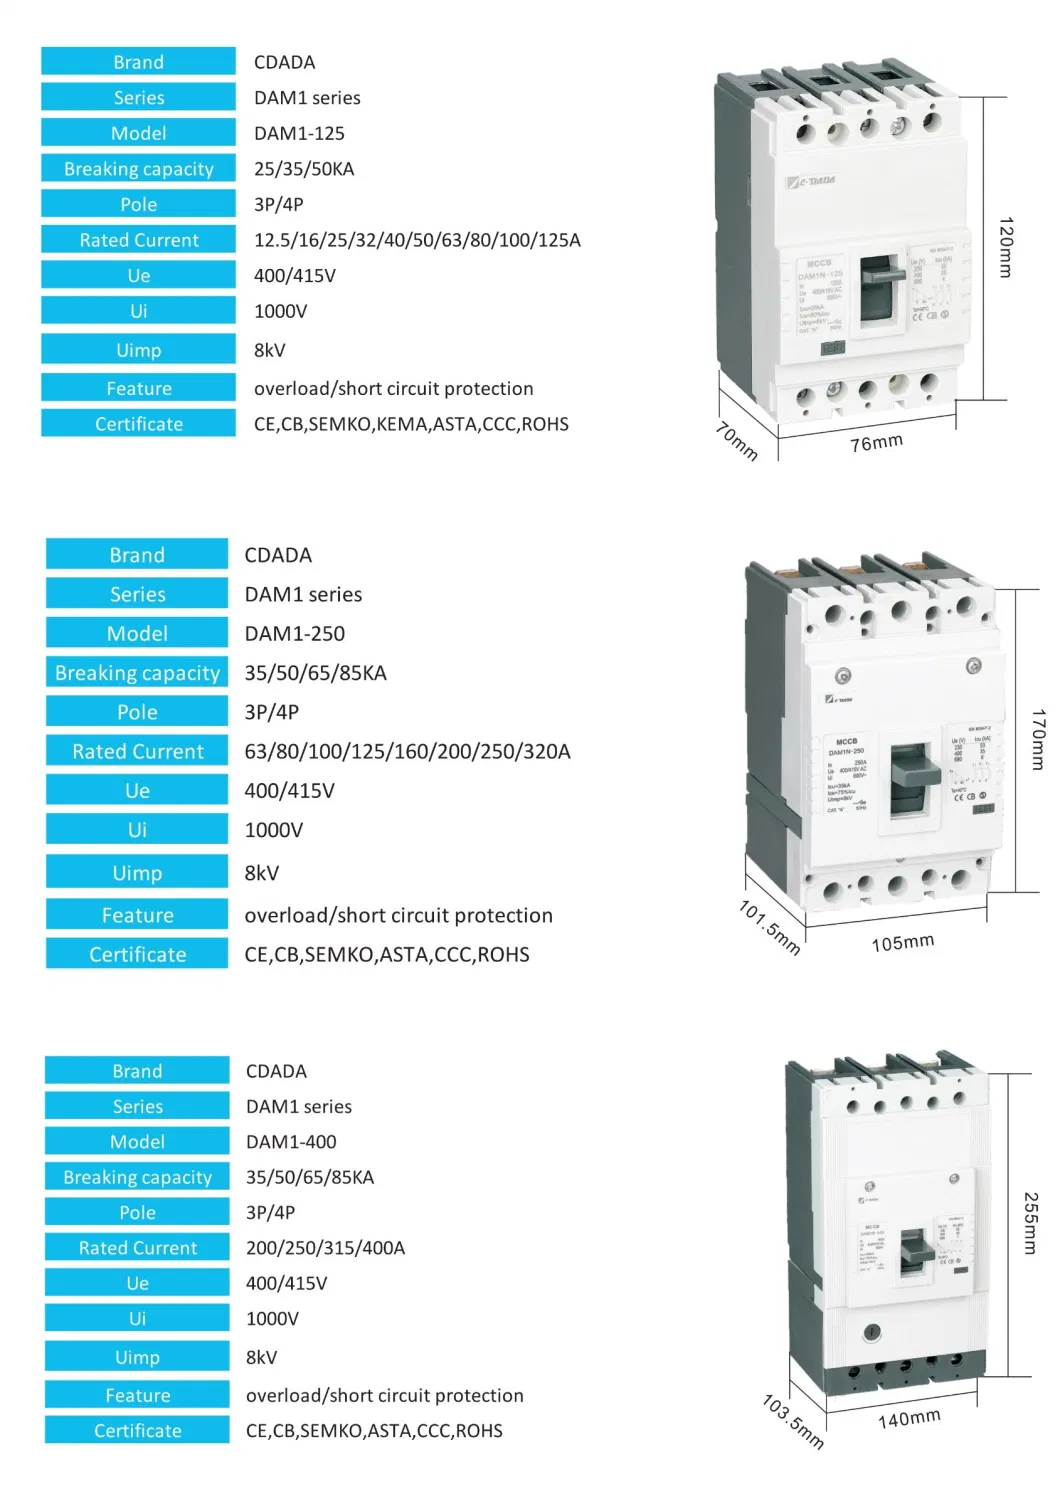 MCCB Dam1-125 3p 12.5~125A Moulded Case Circuit Breaker with Kema Asta Certification